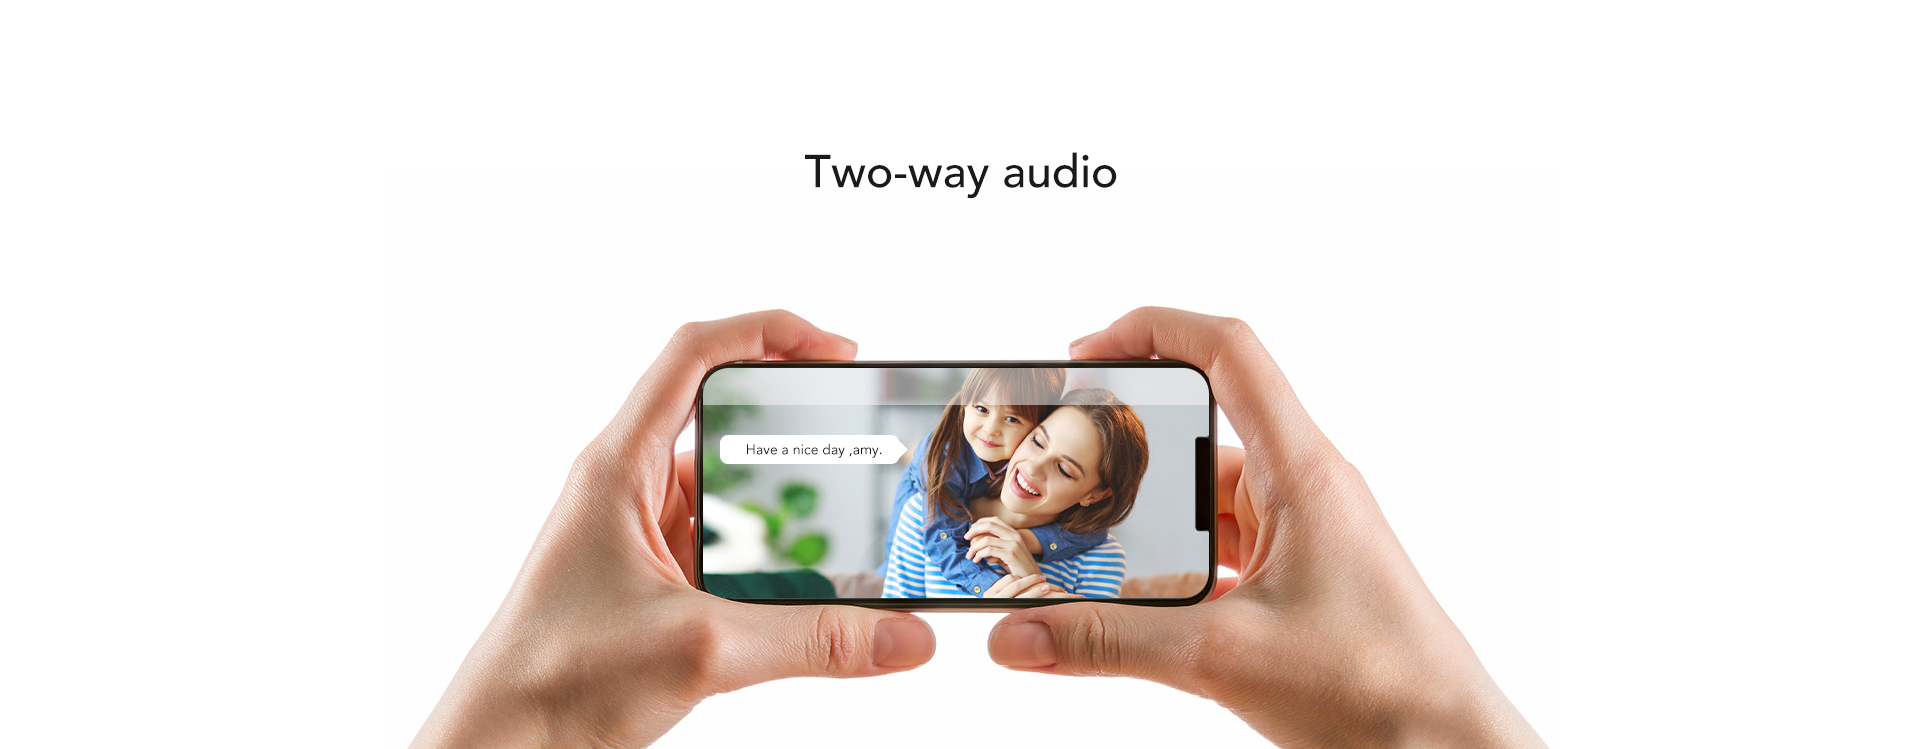 Two-way audio